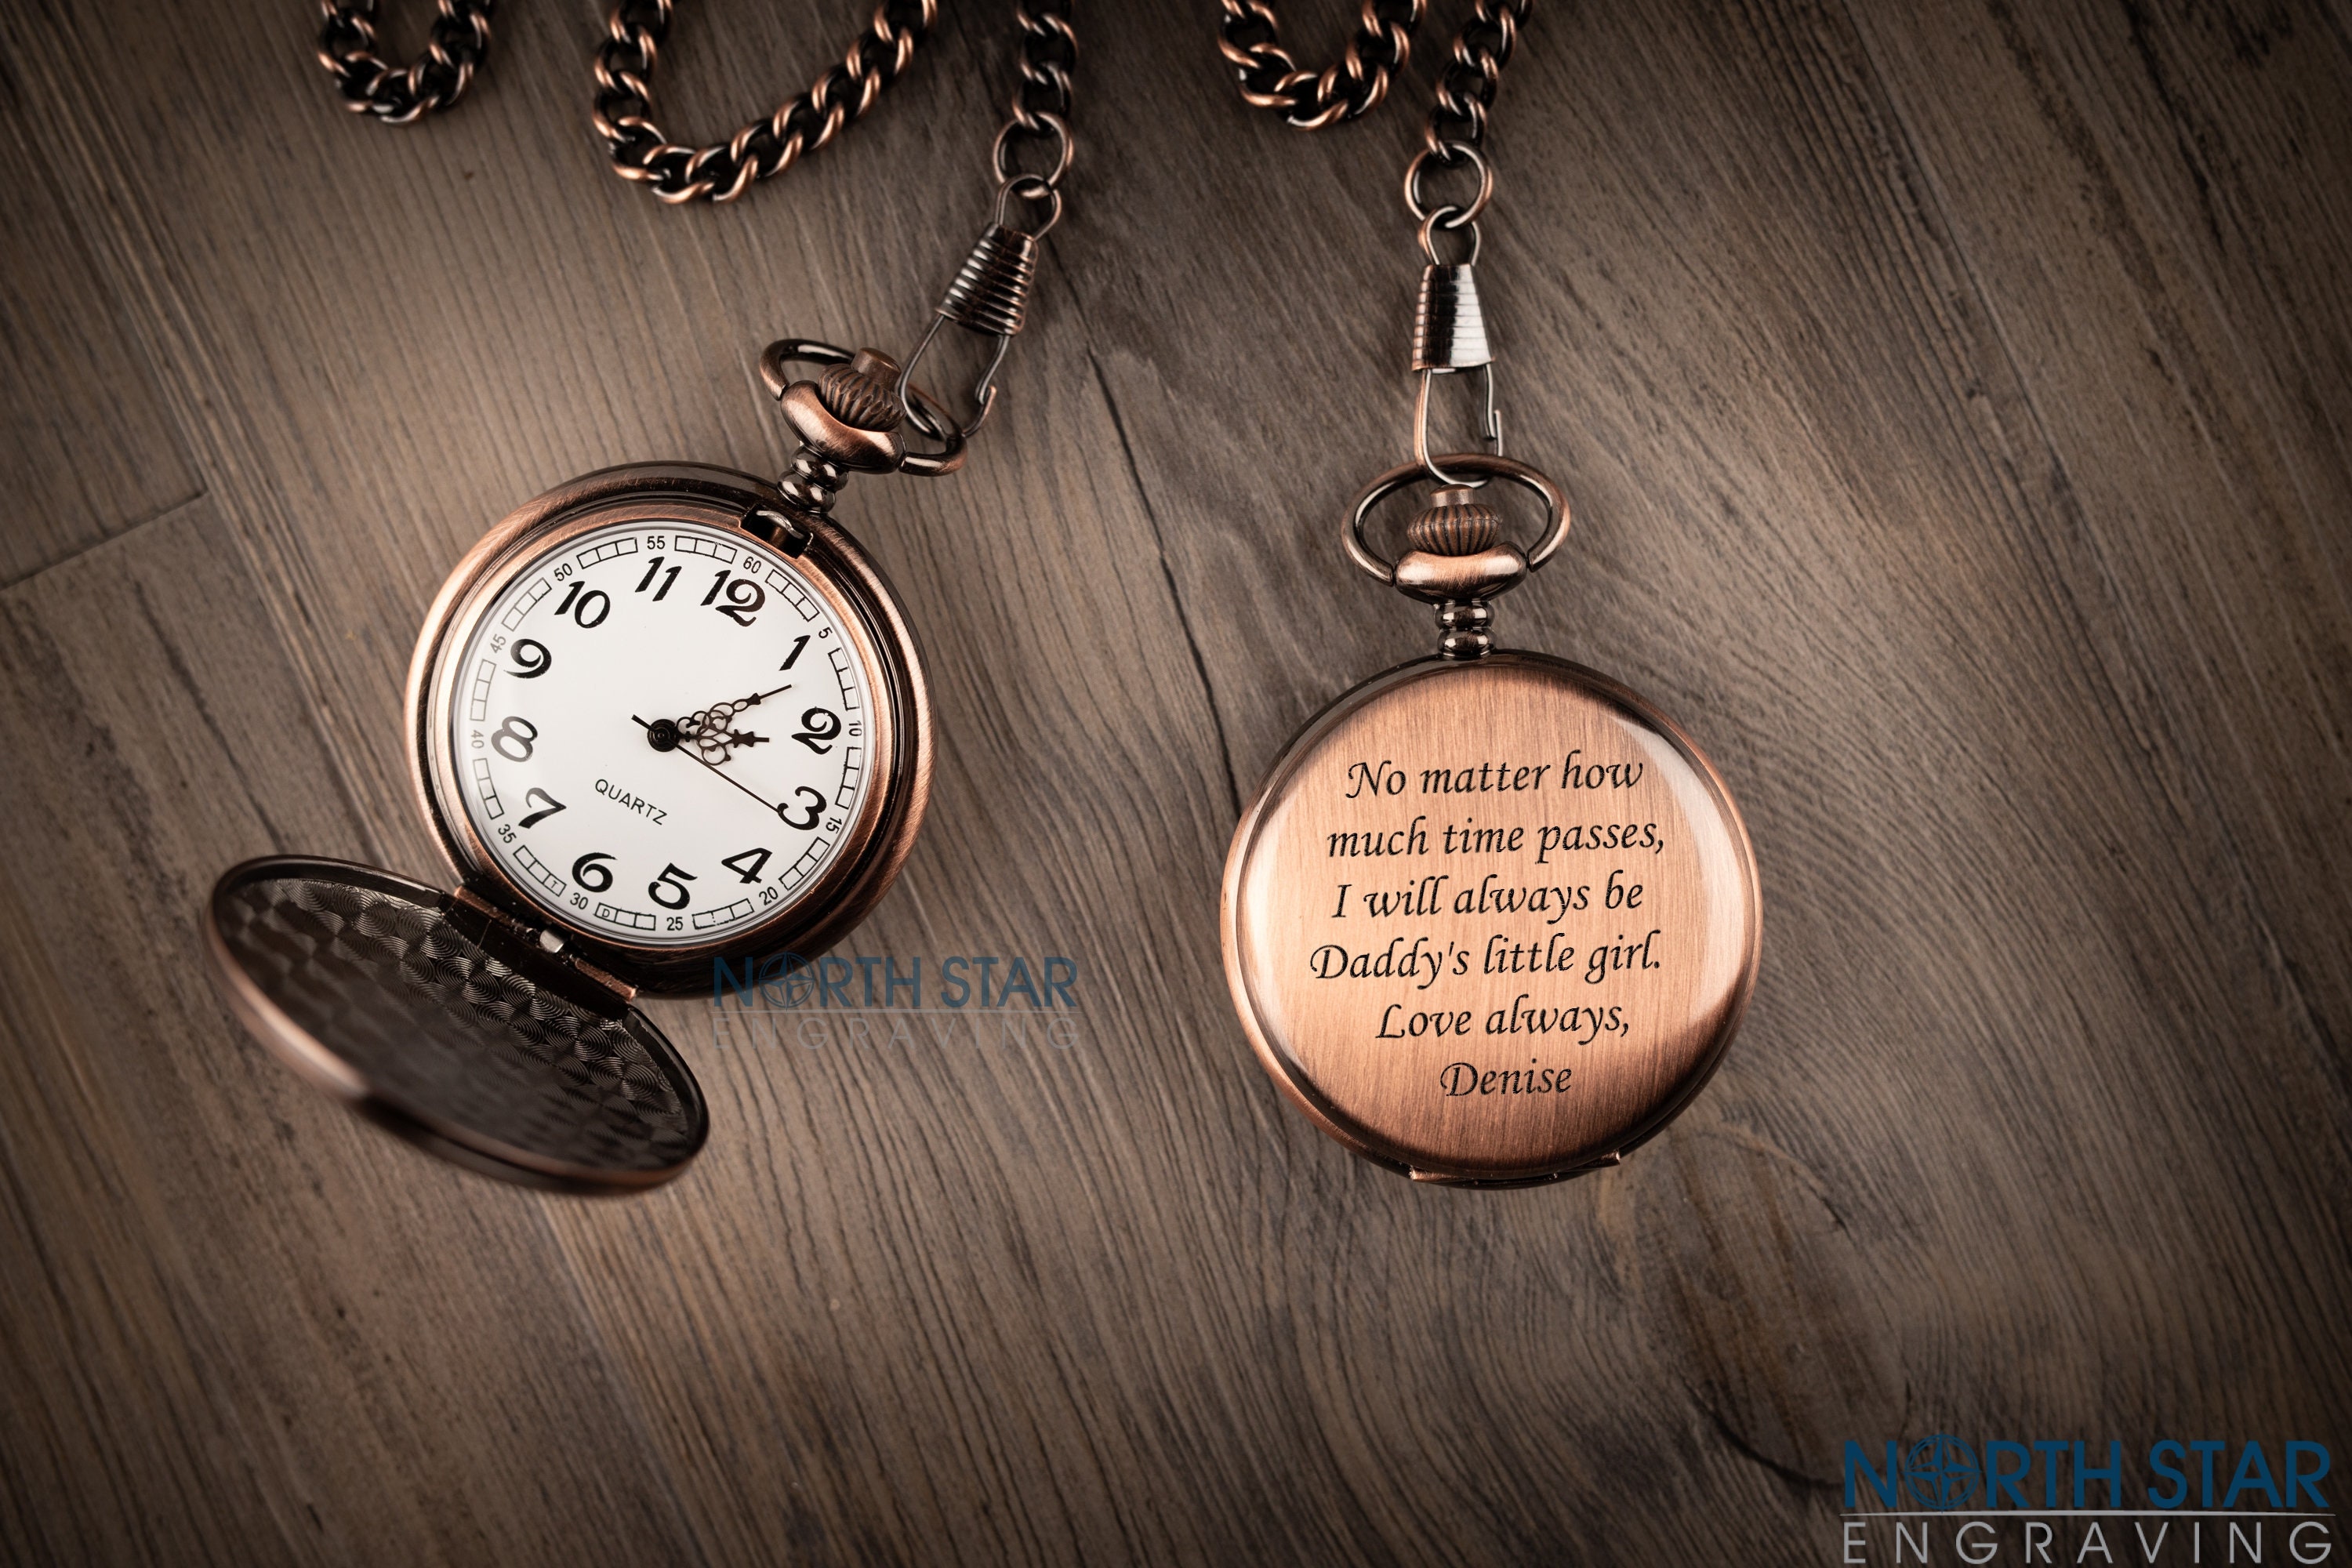 Father of the Bride Father Daughter gift Pocket Watch Chain Pocket Watch Mens Personalized Gifts for Dad from Daughter Pocket Watches Sieraden Horloges Zakhorloges 